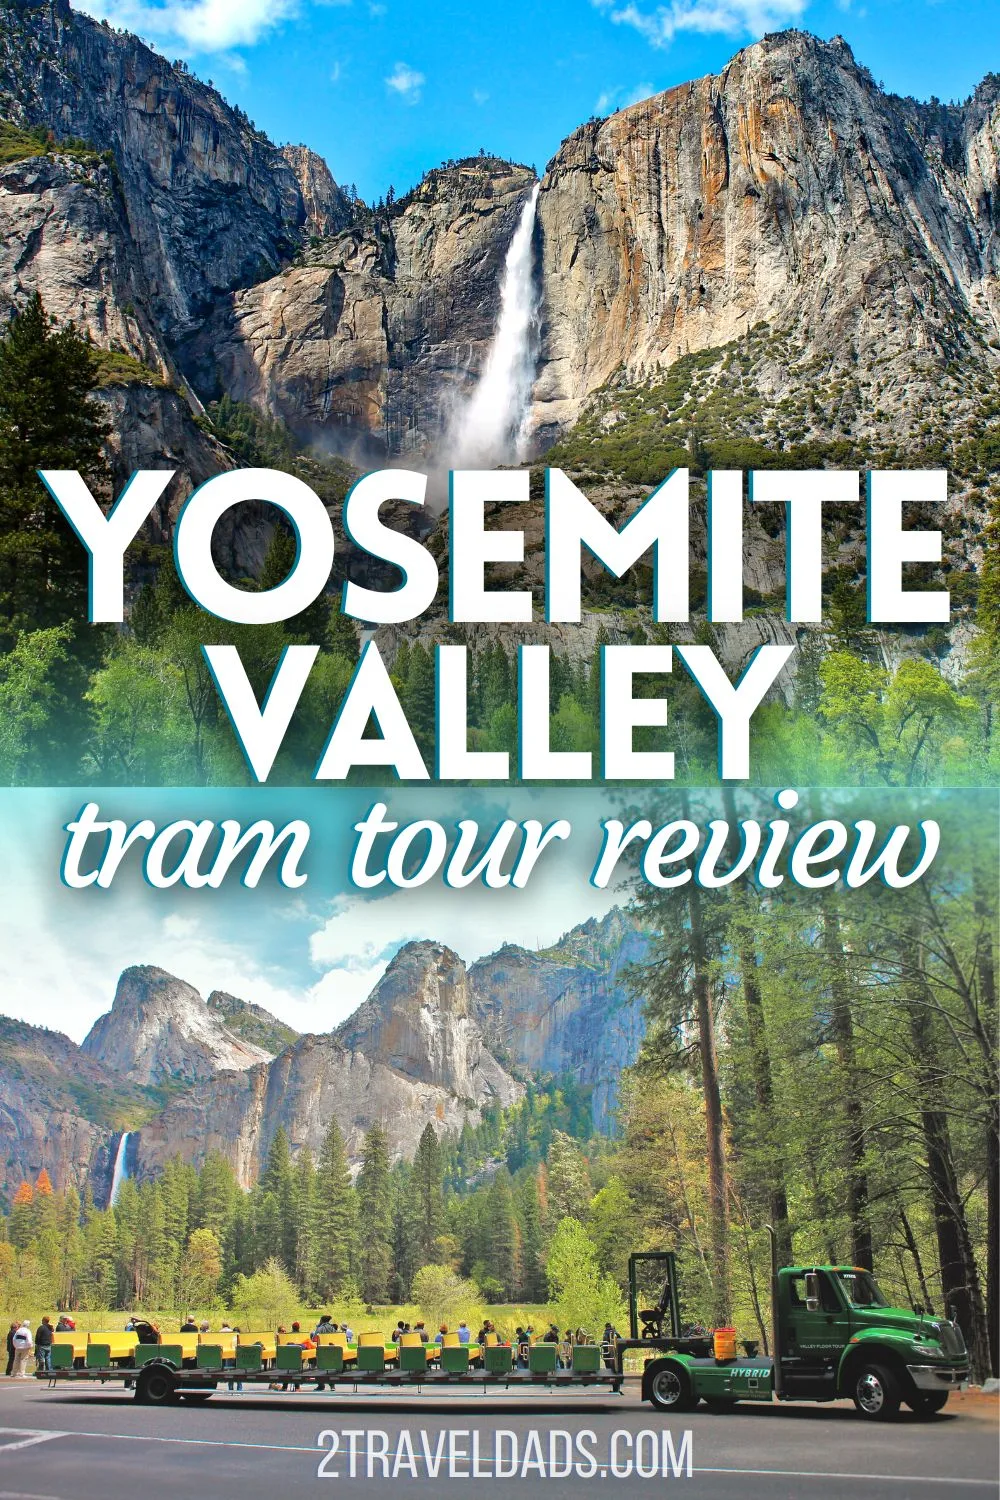 The Yosemite Valley Tram Tour is a great way to experience the highlights of Yosemite National Park if you're short on time or energy. See what to expect, how to book it, and find our why it's one of the best National Park tours available.